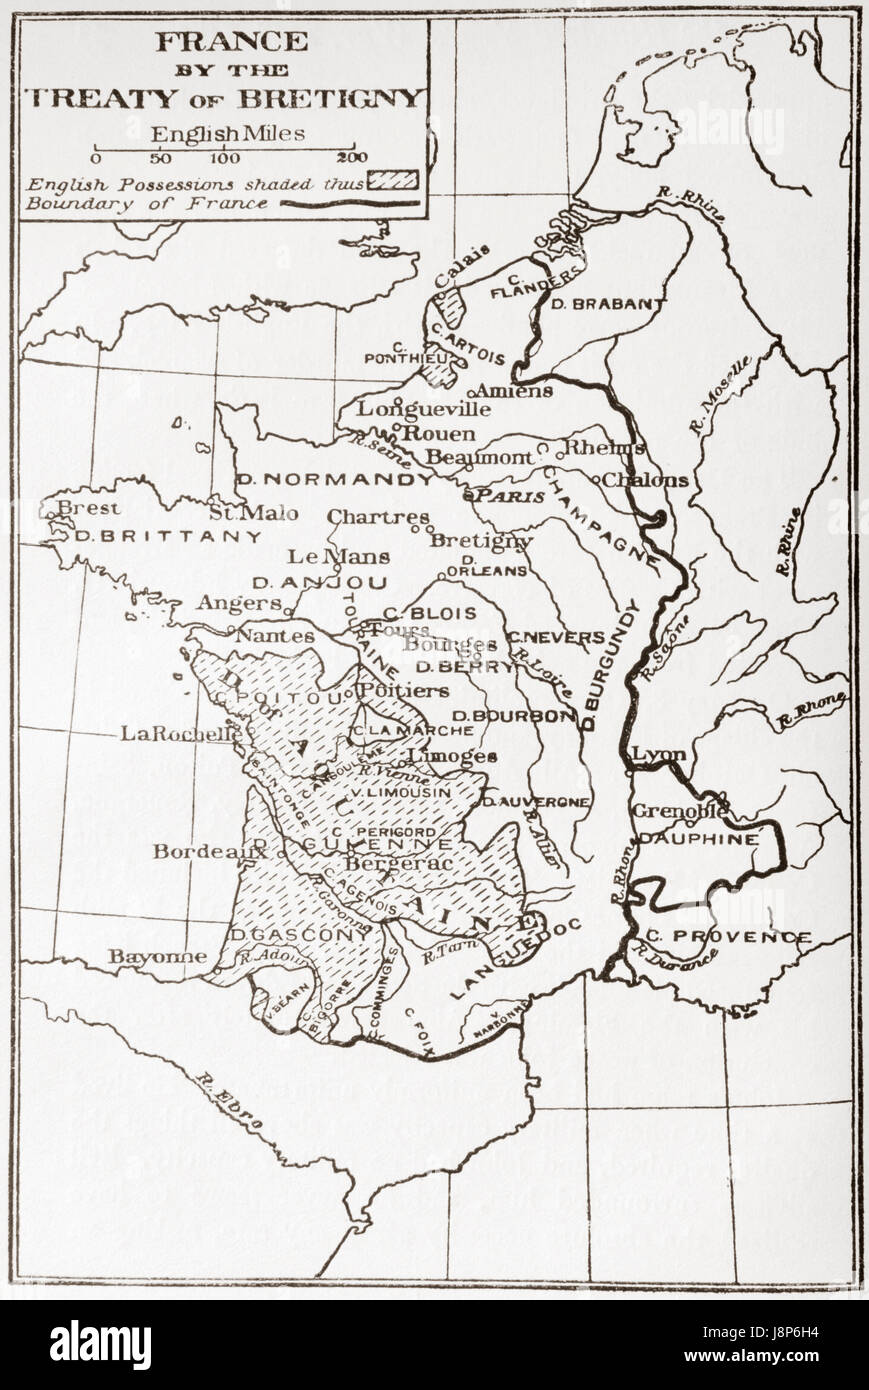 Map of France by the Treaty of Bretigny, 1360.   From France, Mediaeval and Modern A History, published 1918. Stock Photo